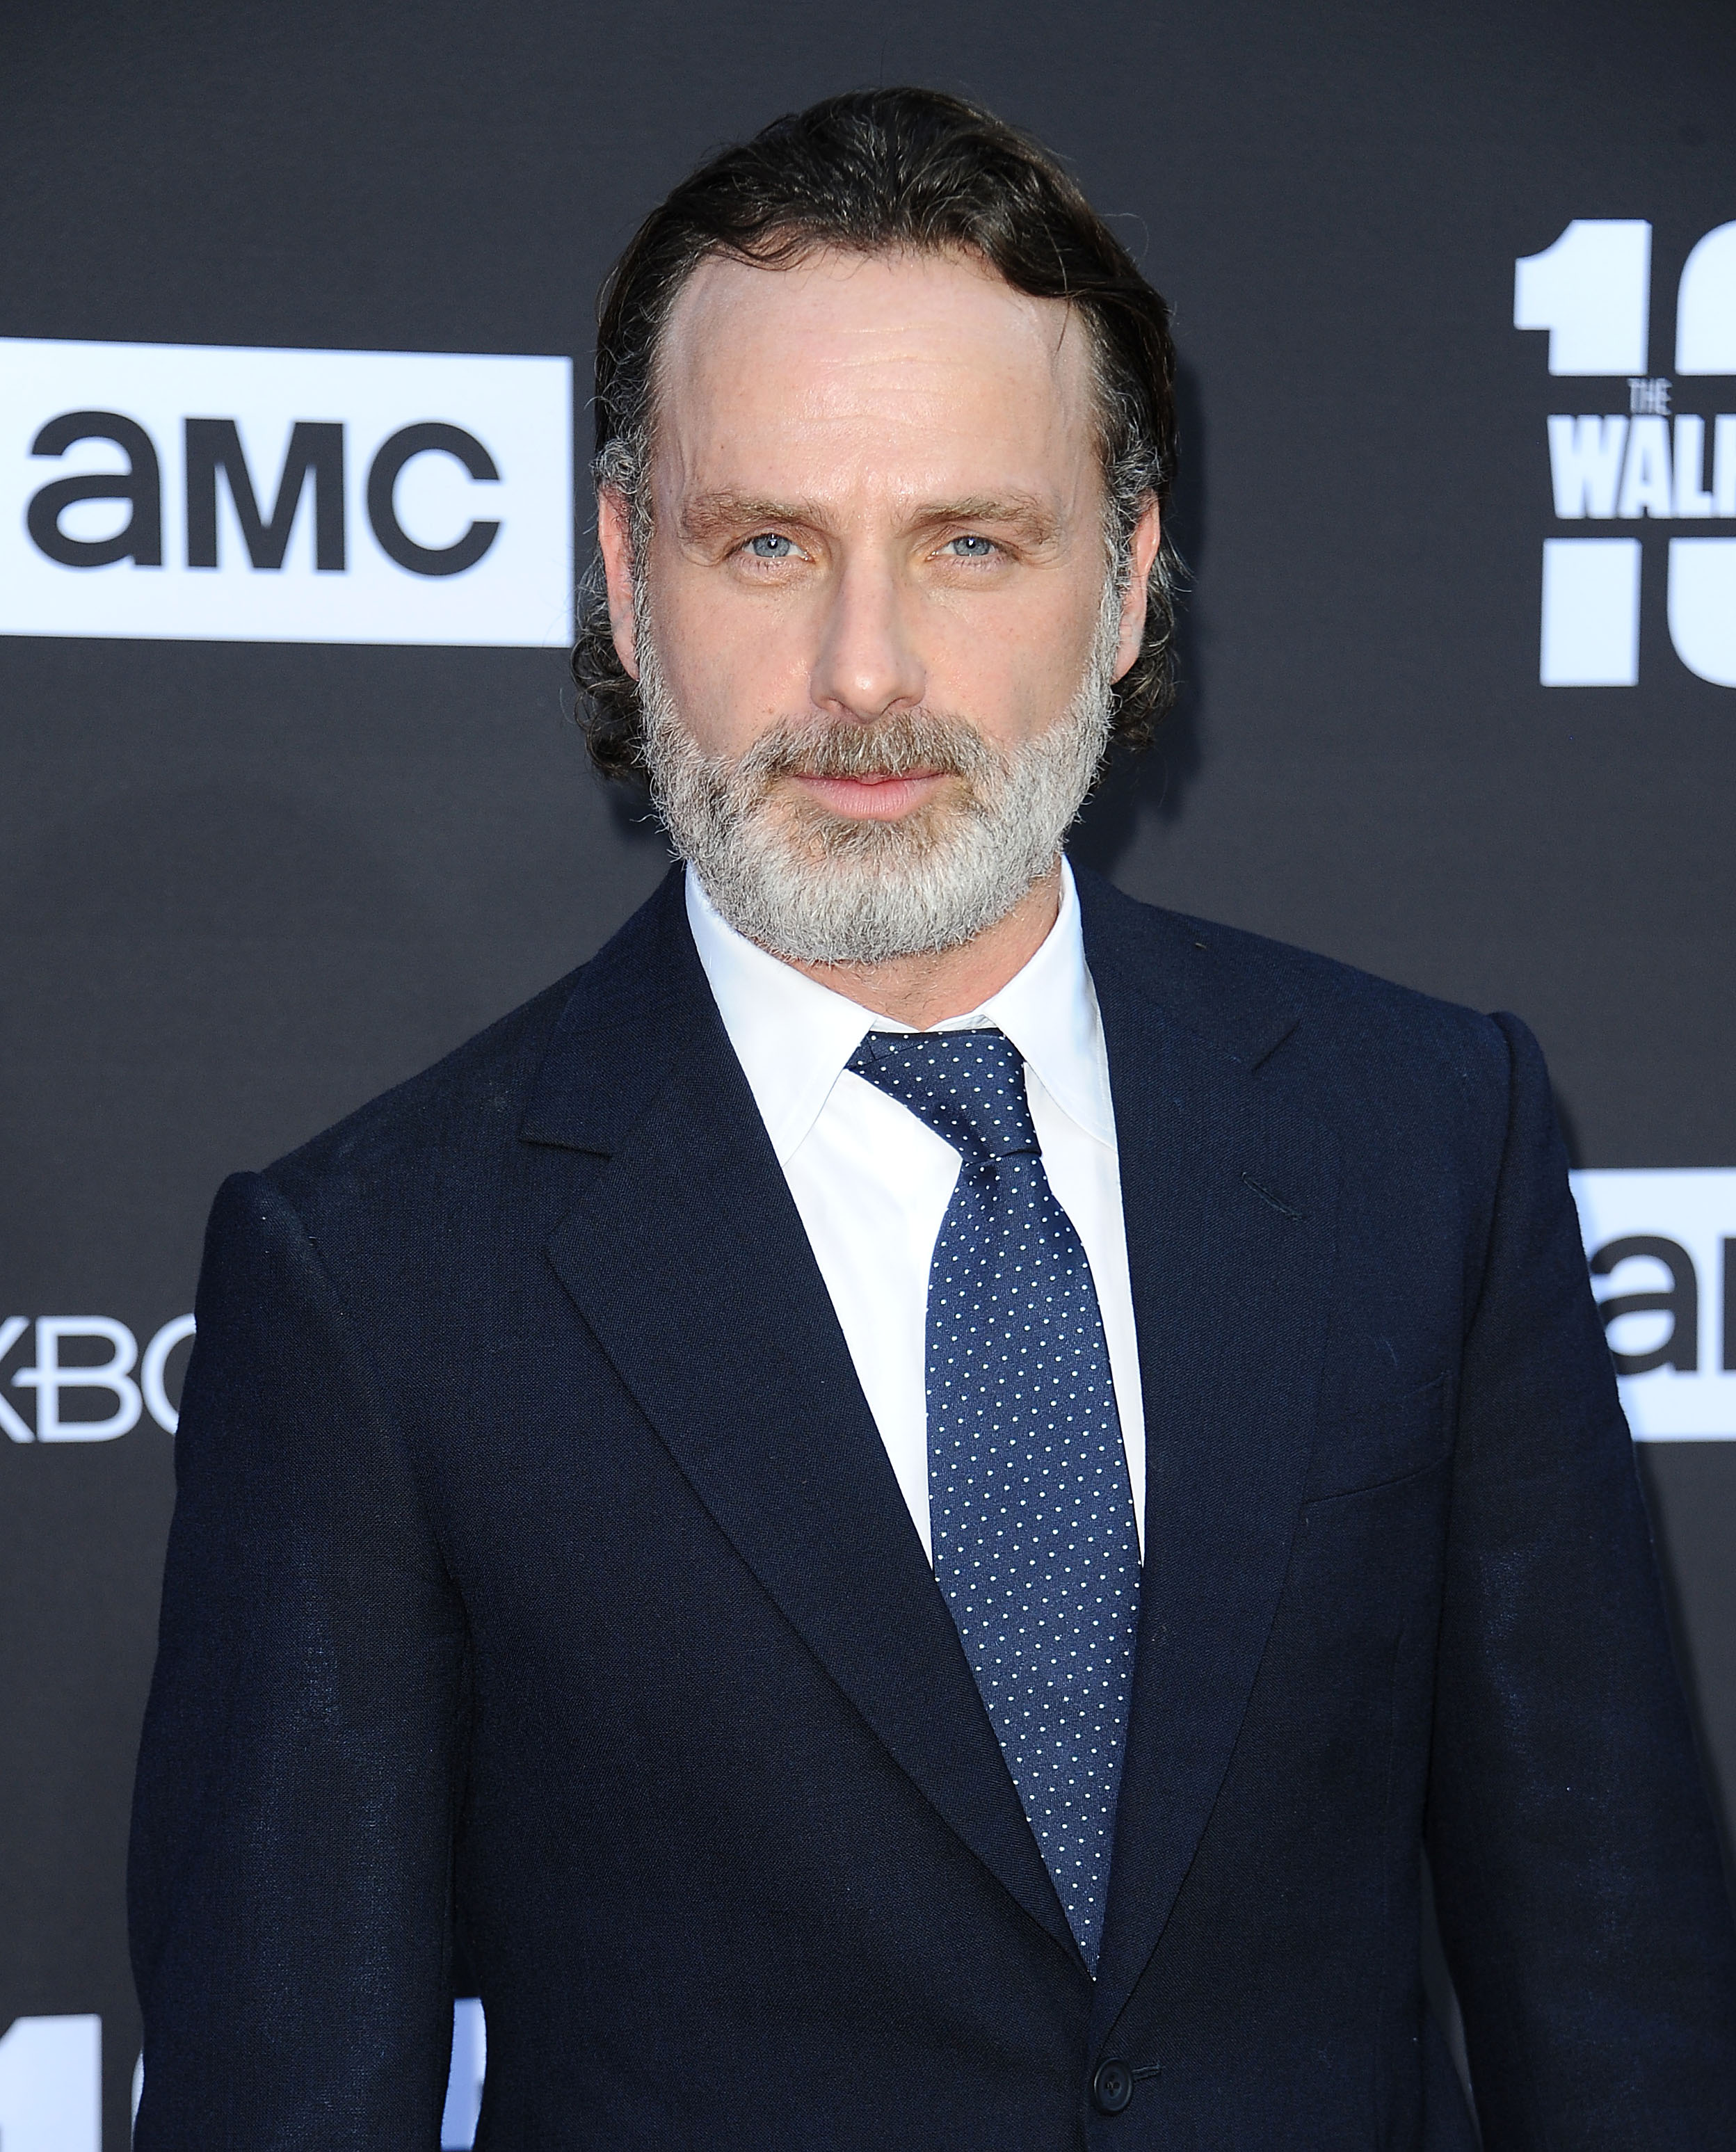 Andrew Lincoln at the 100th episode celebration off "The Walking Dead" in Los Angeles on October 22, 2017 | Source: Getty Images